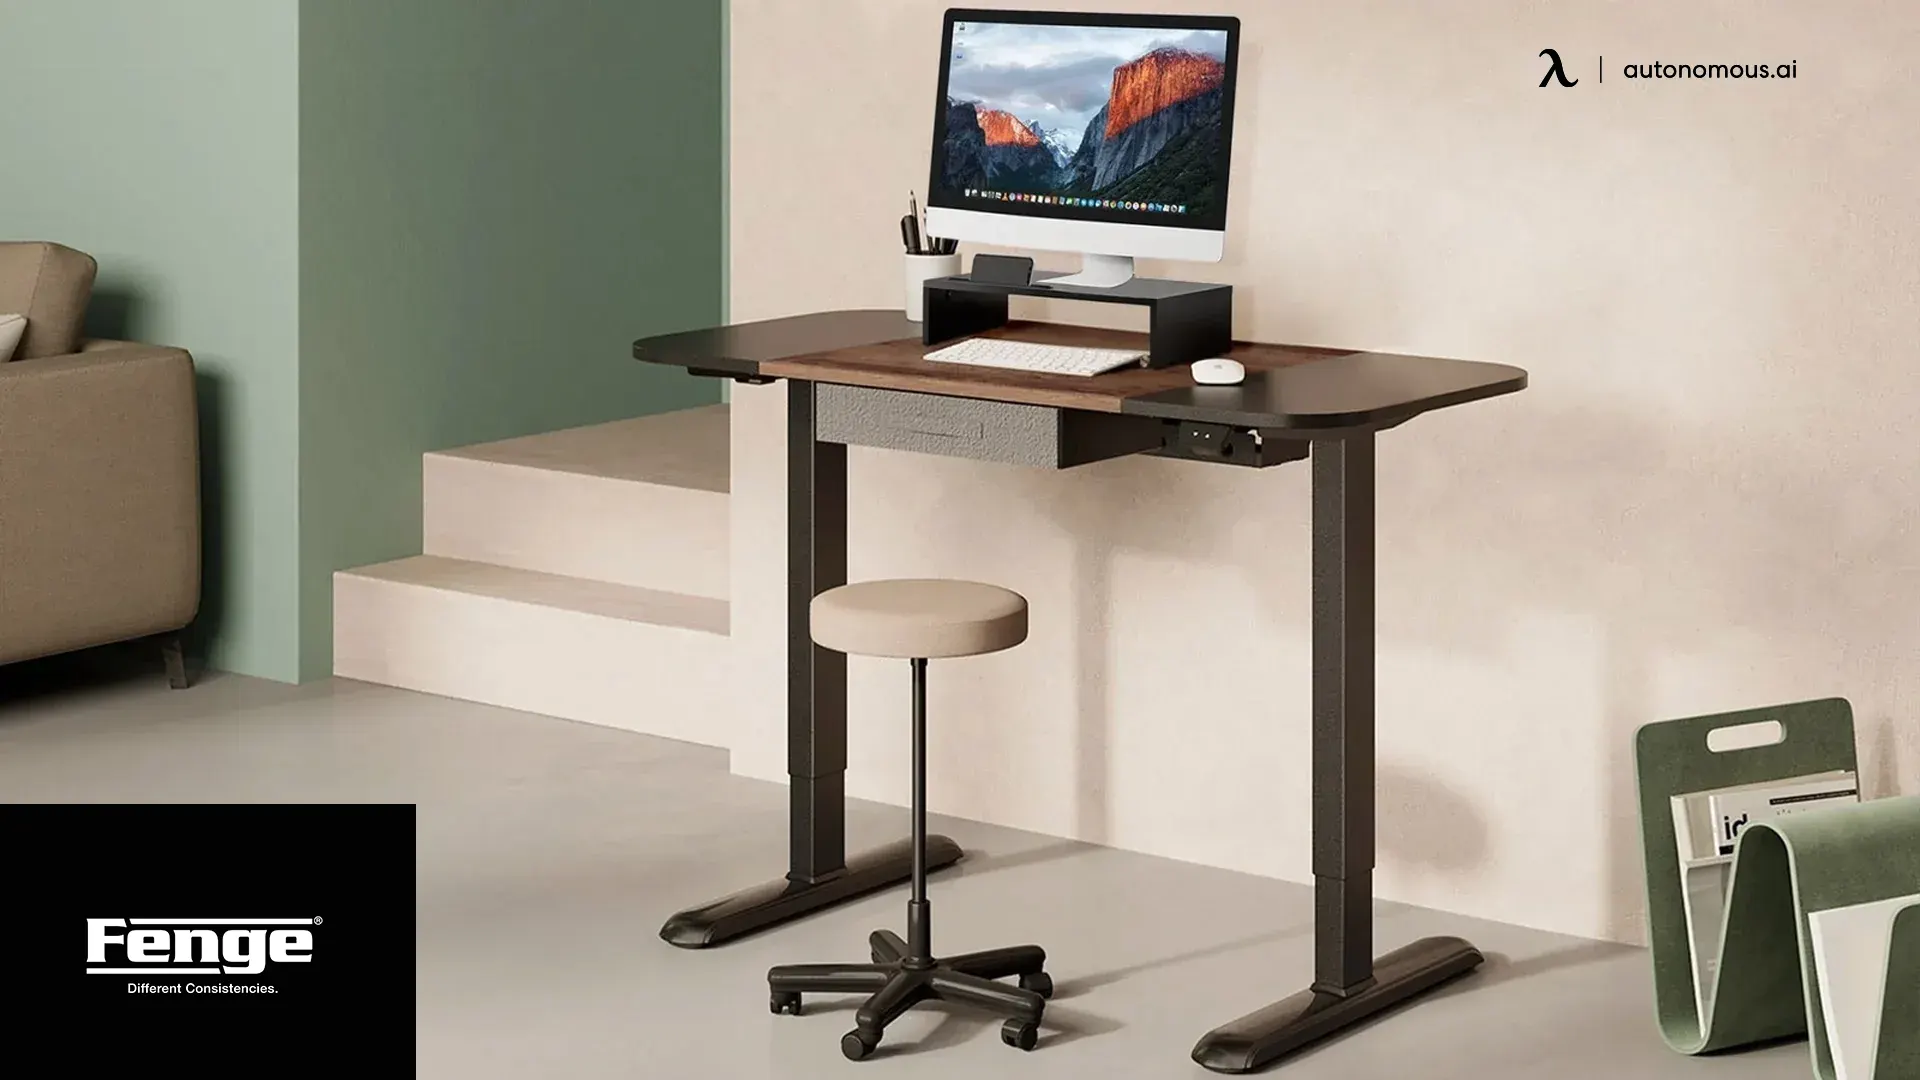 FENGE - best place to buy a desk